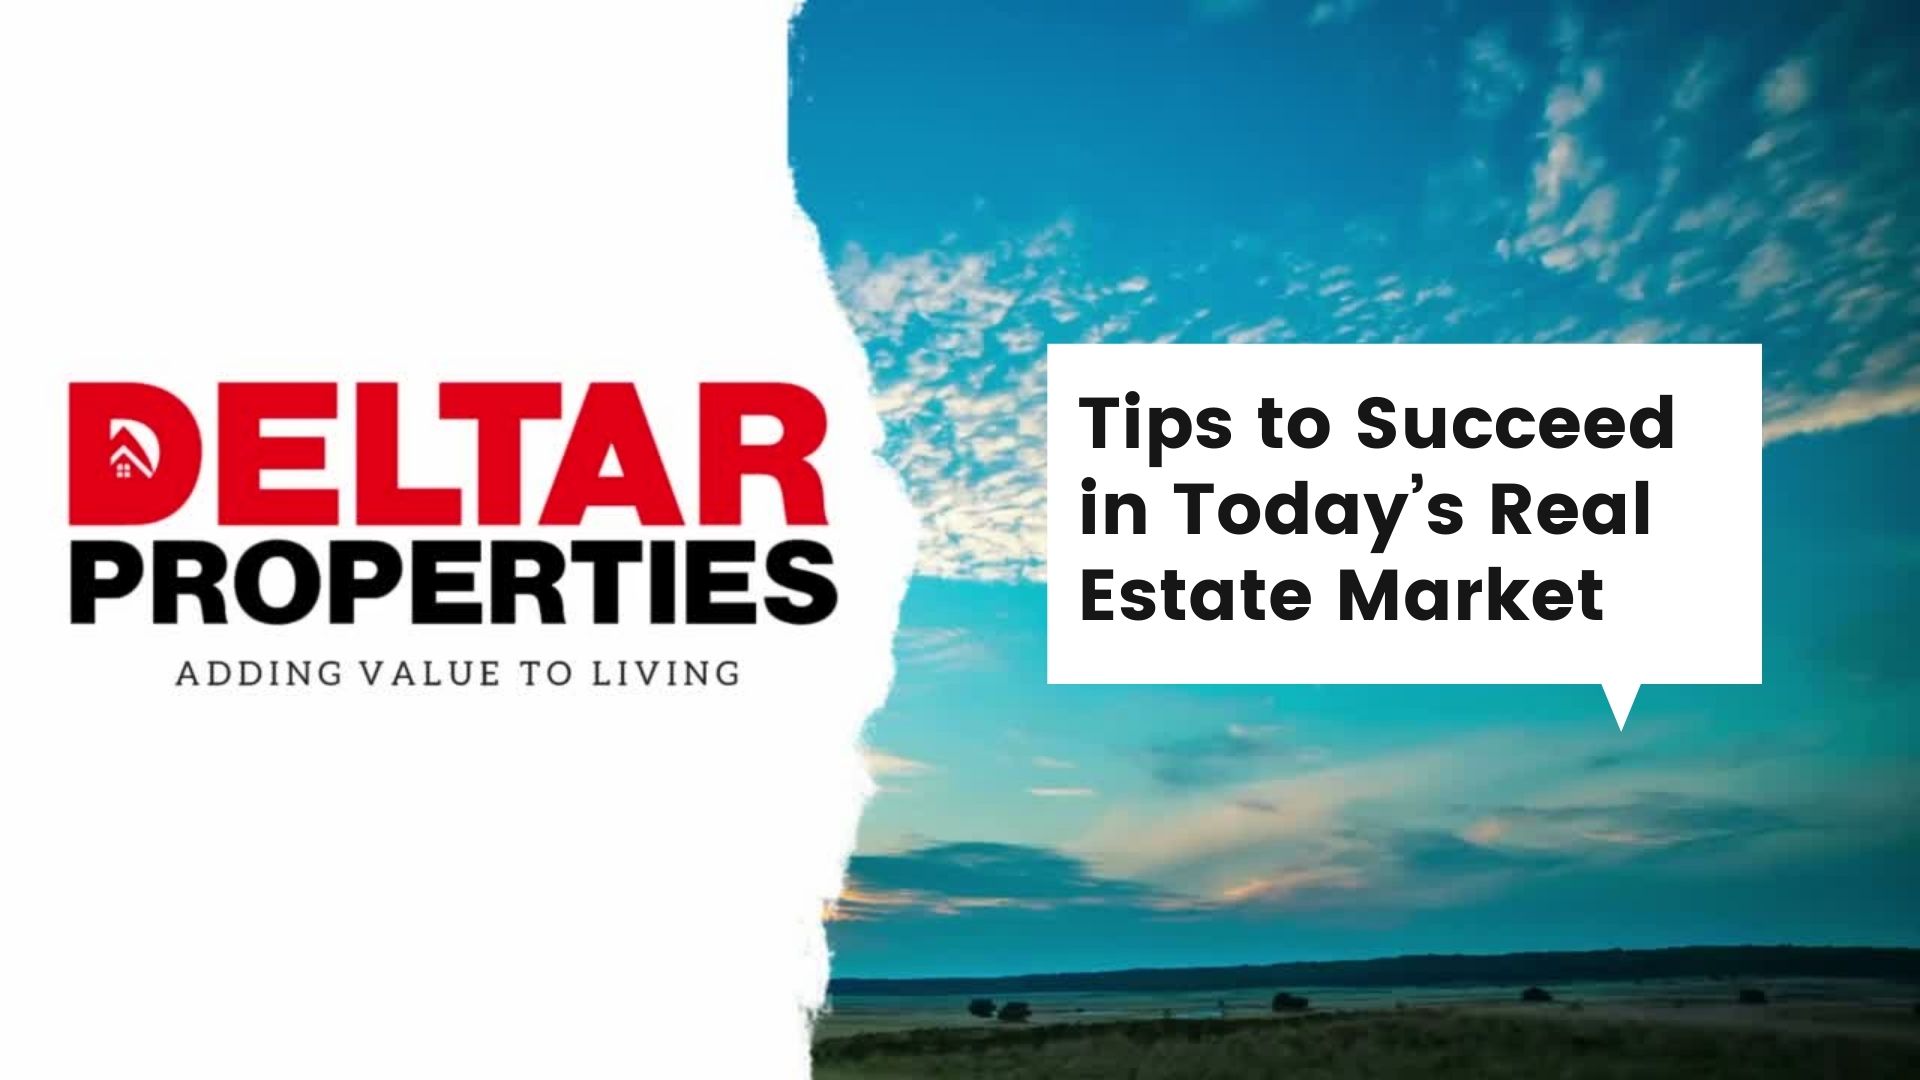 Tips to Succeed in Today’s Real Estate Market